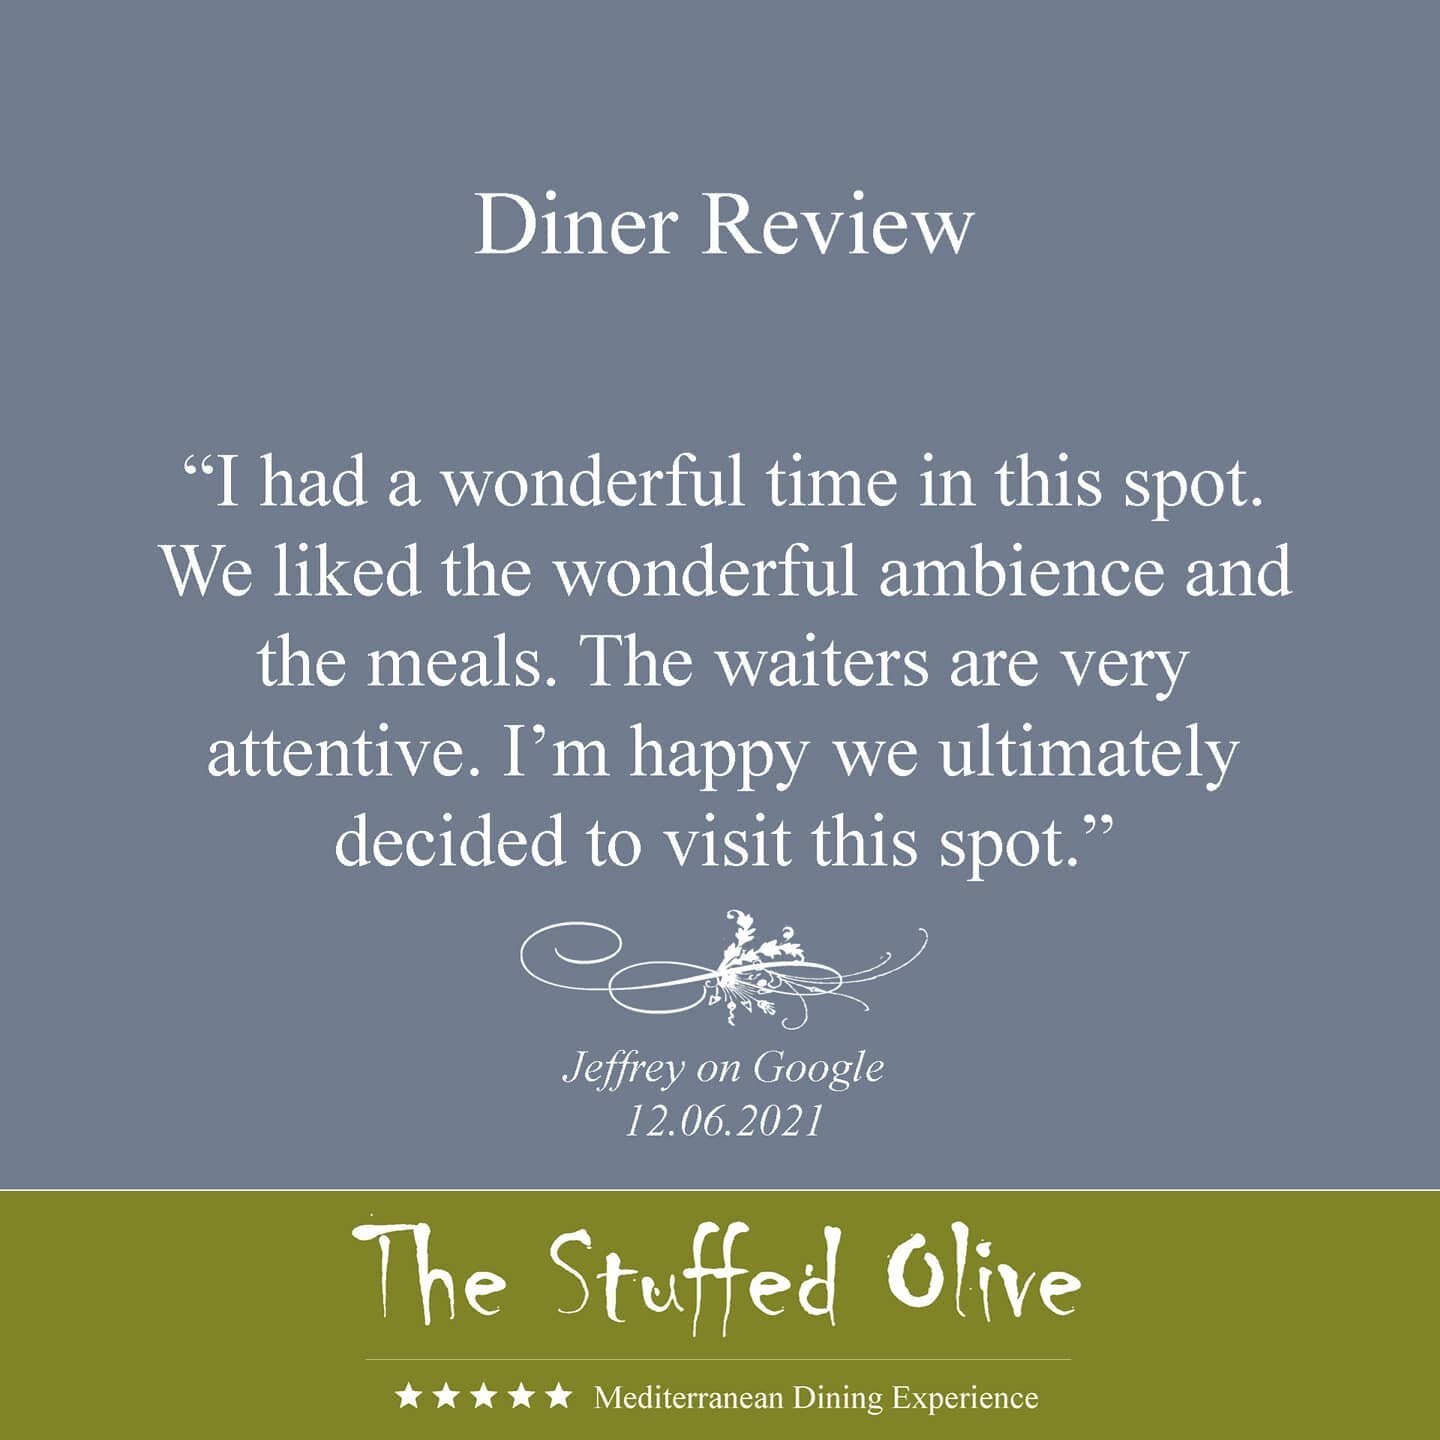 Another amazing review from one of our customers ☺️ 

#showingthelove #customerreviews #stuffedolive #restaurants #review #northamptonshire #northantsrestaurants #northamptonfoodie #northantsfoodie #northantslife #northampton #mediterraneanfood #med 